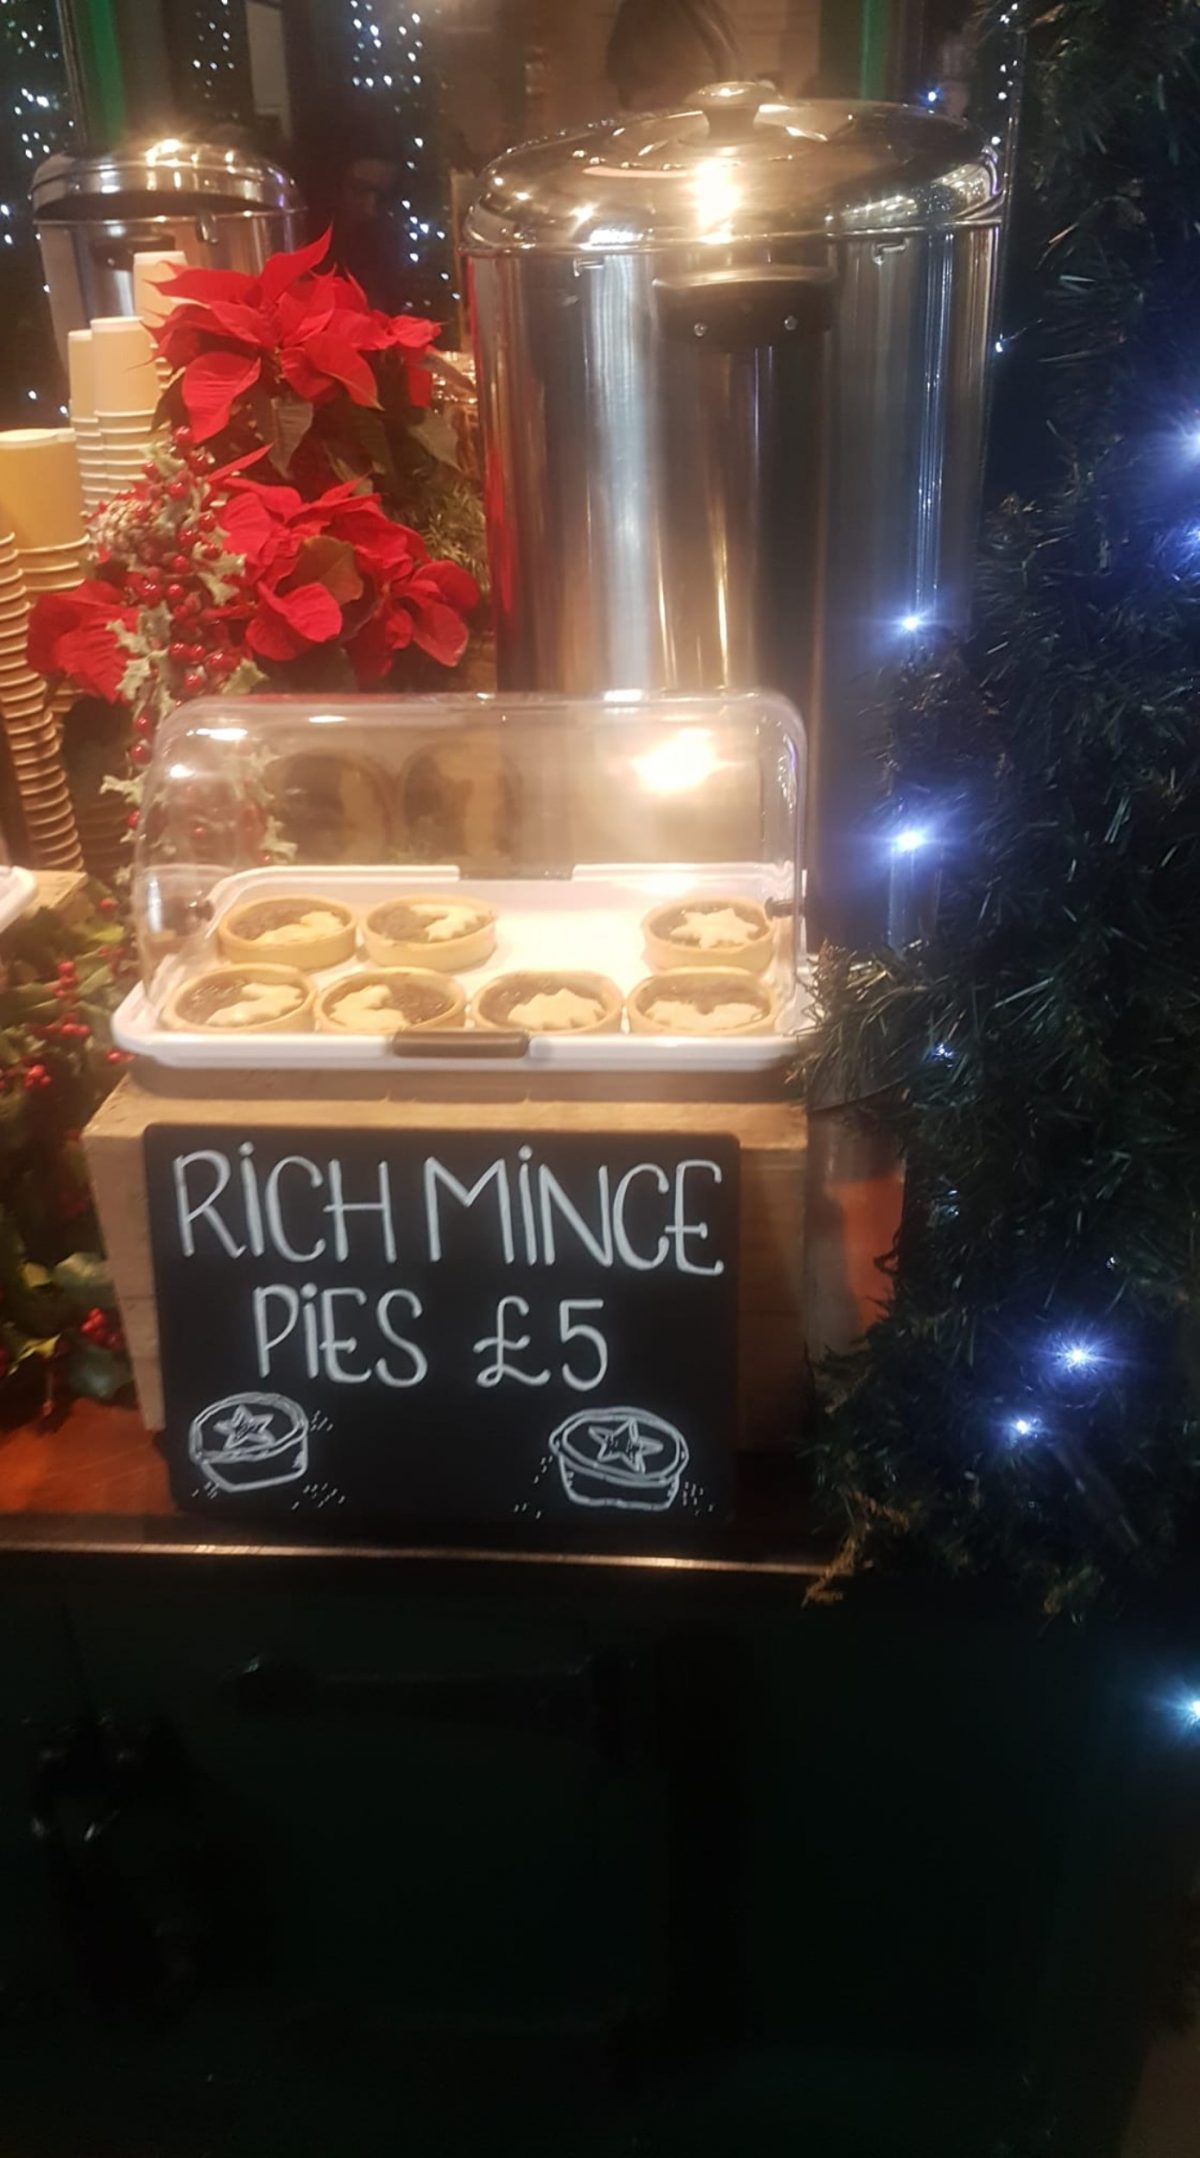 The £5 mince pies